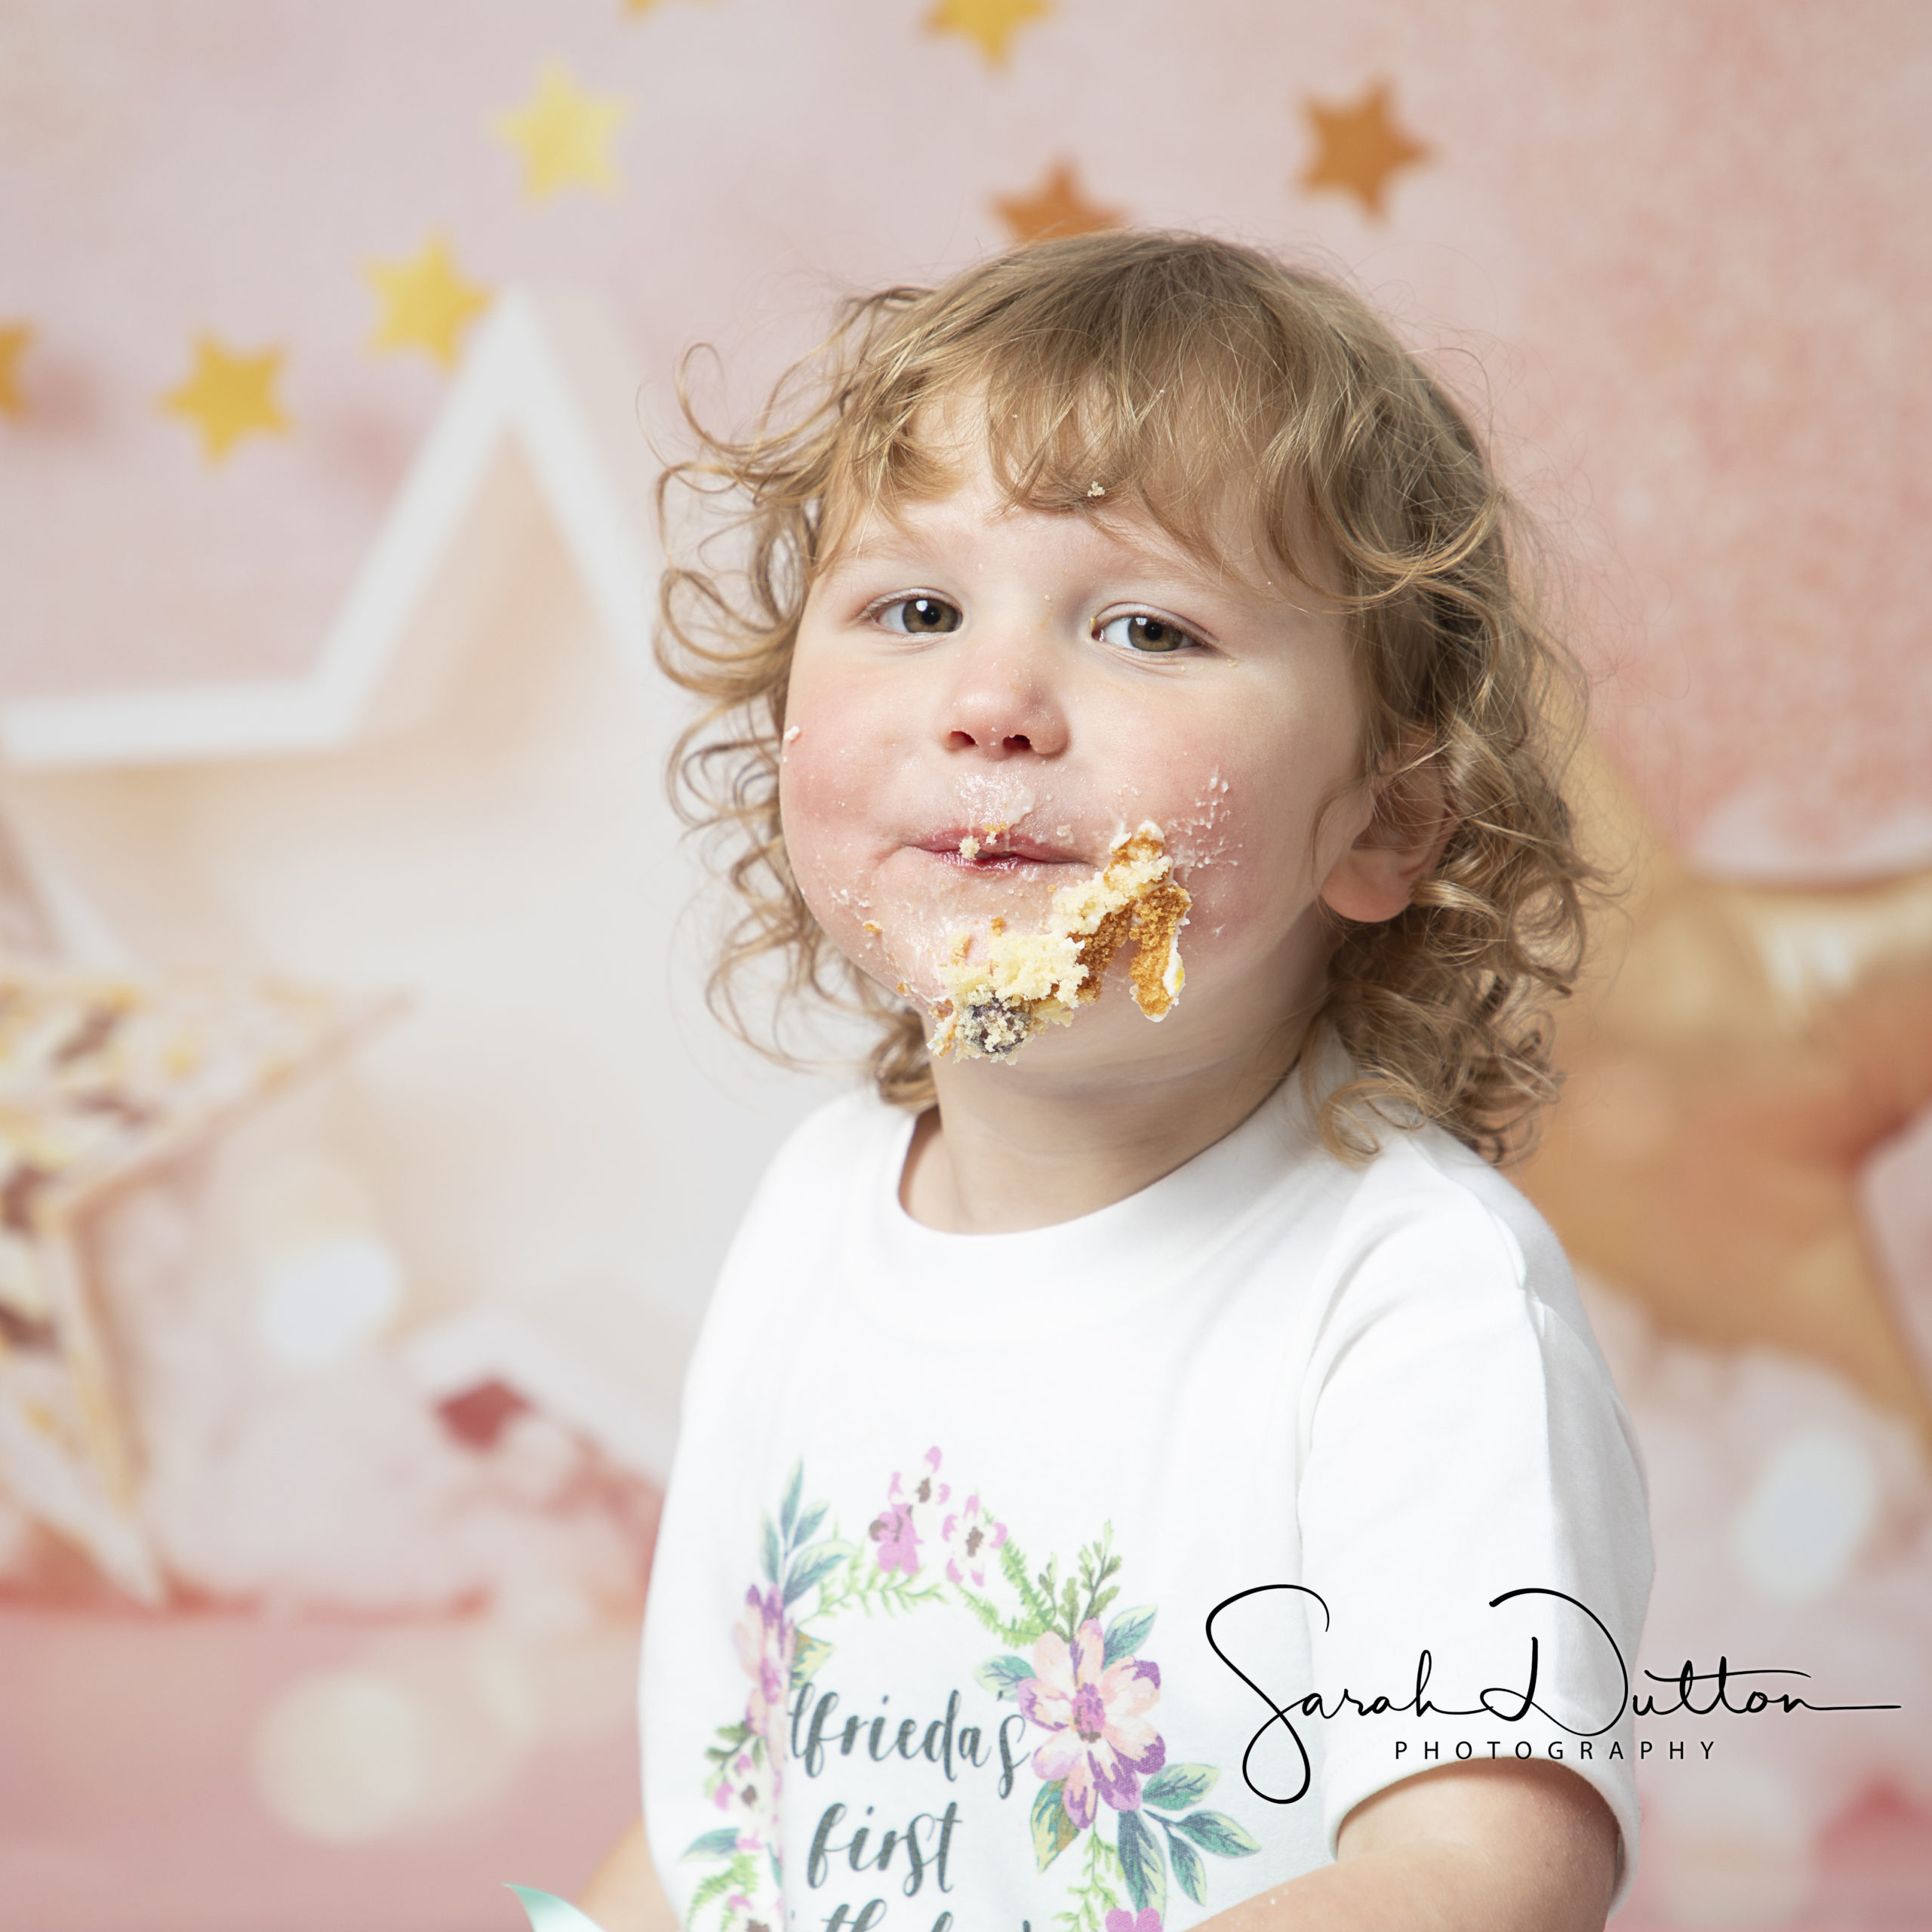 Cake Smash Photography taken by a profession photographer in her studio in Whitchurch Hampshire but covers Basingstoke, Andover, Newbury and Winchester 